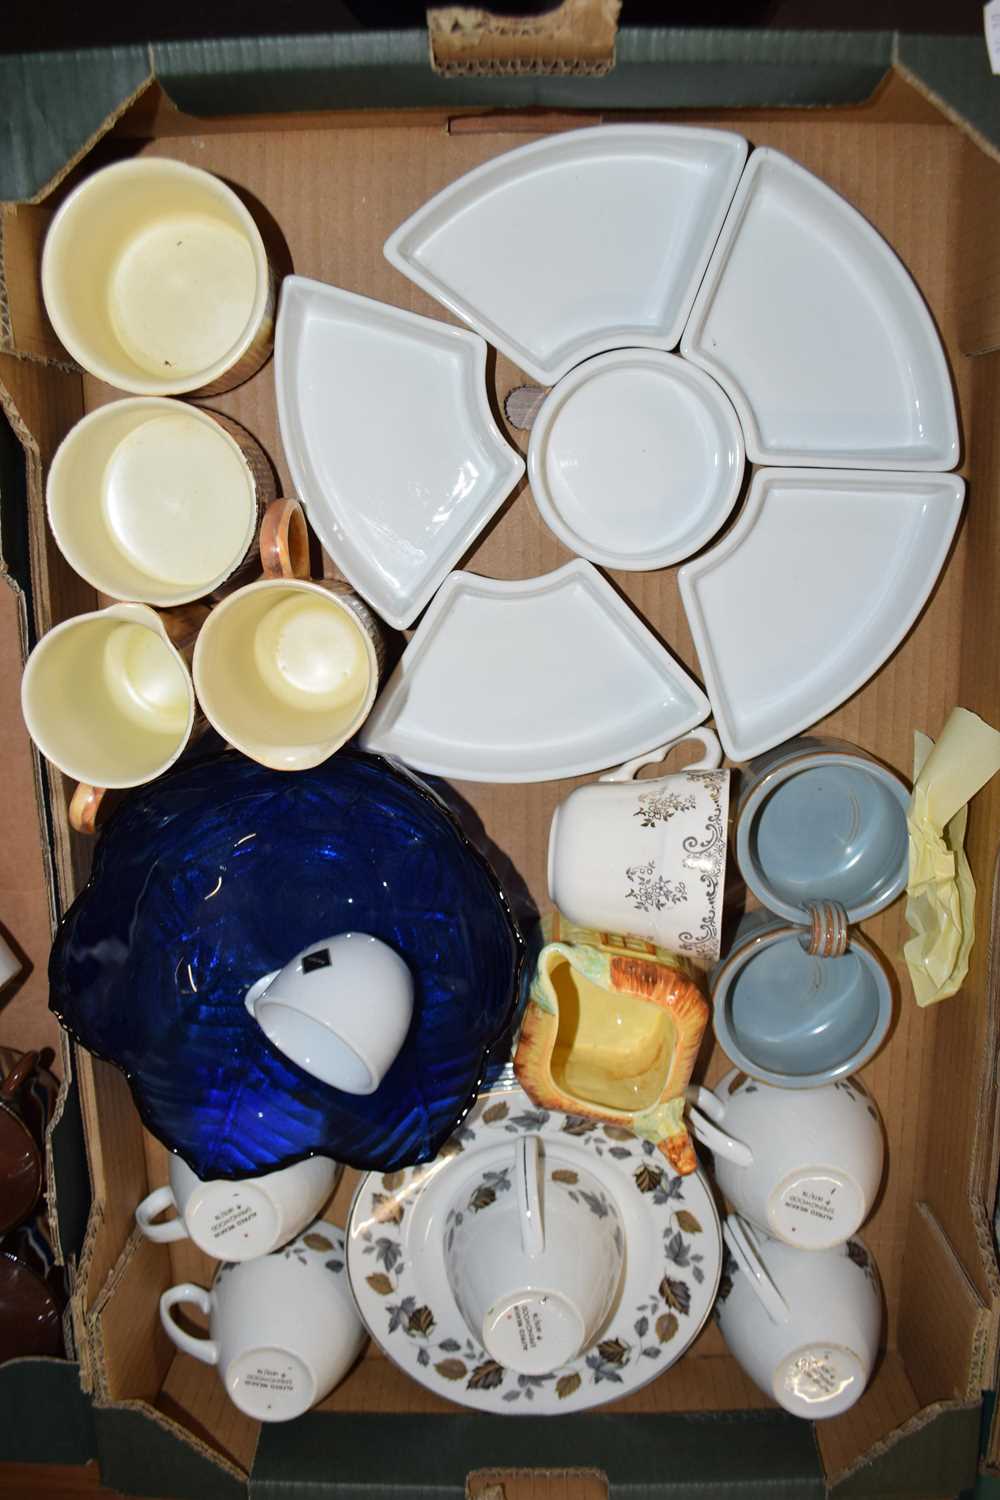 BOX OF VARIOUS CERAMICS AND GLASSWARES TO INCLUDE ALFRED MEAKIN TEAWARES, HORS D'OEUVRES DISHES ETC